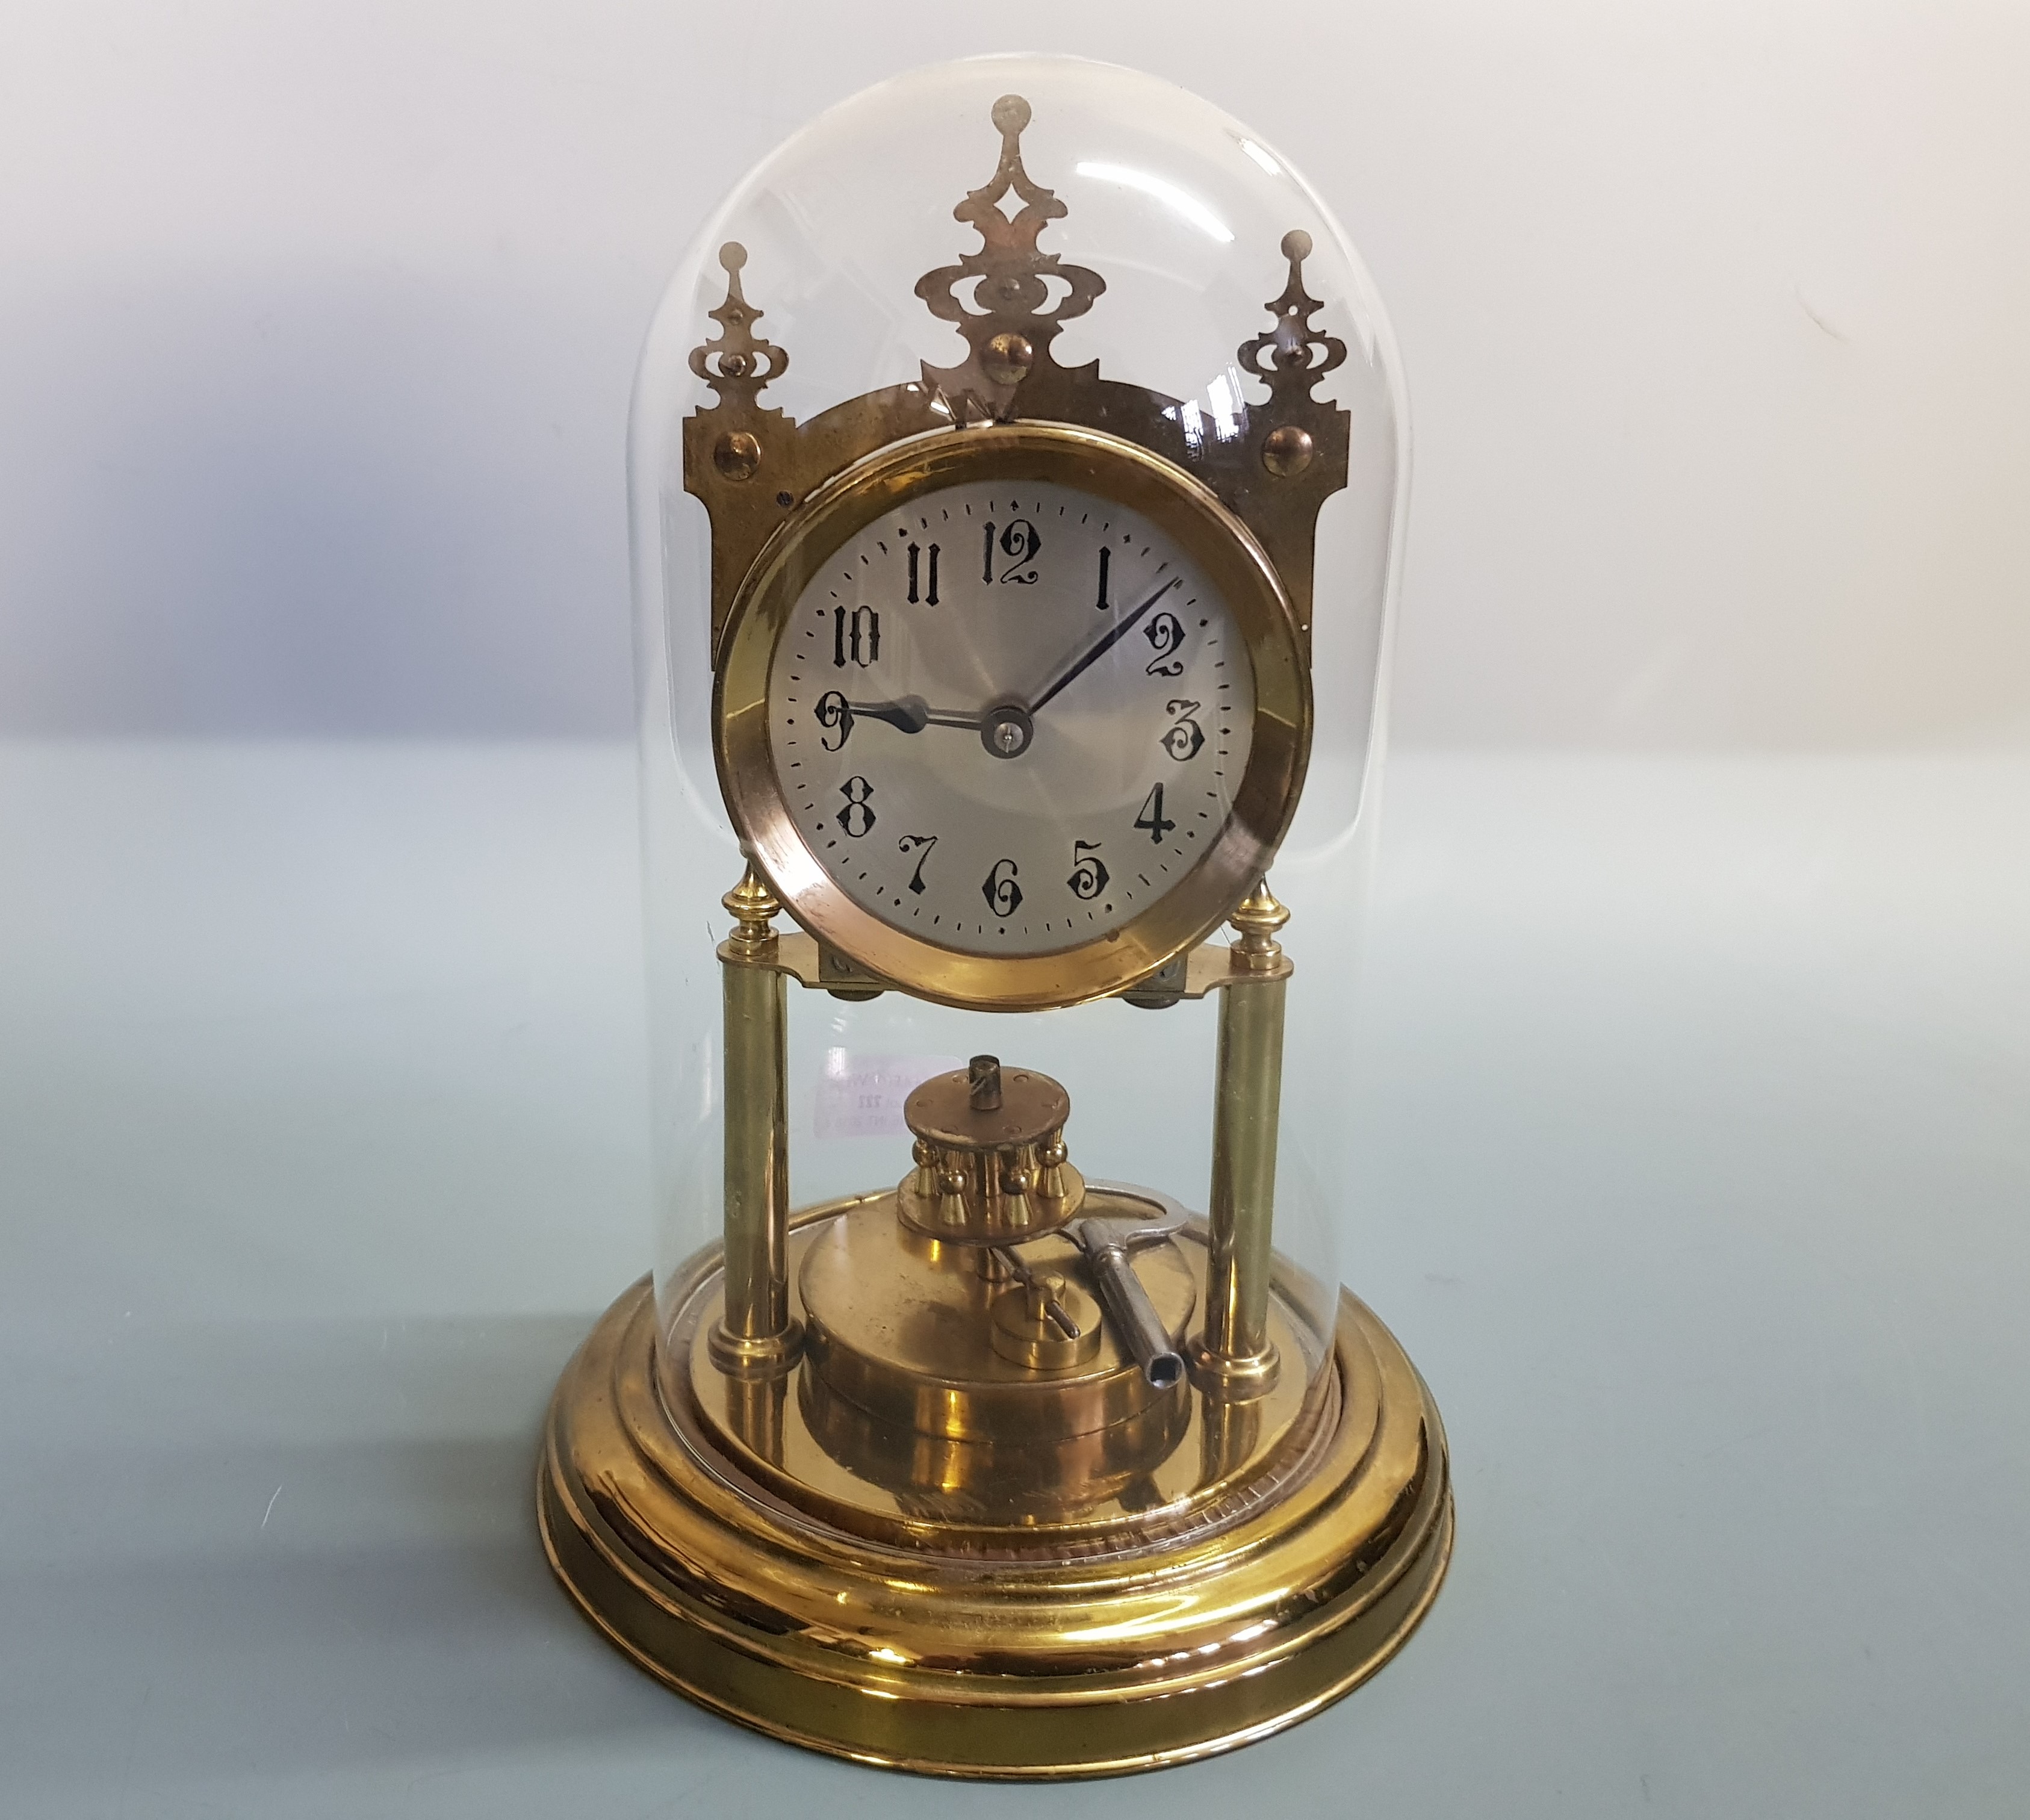 A brass anniversary mantle clock under glass dome.